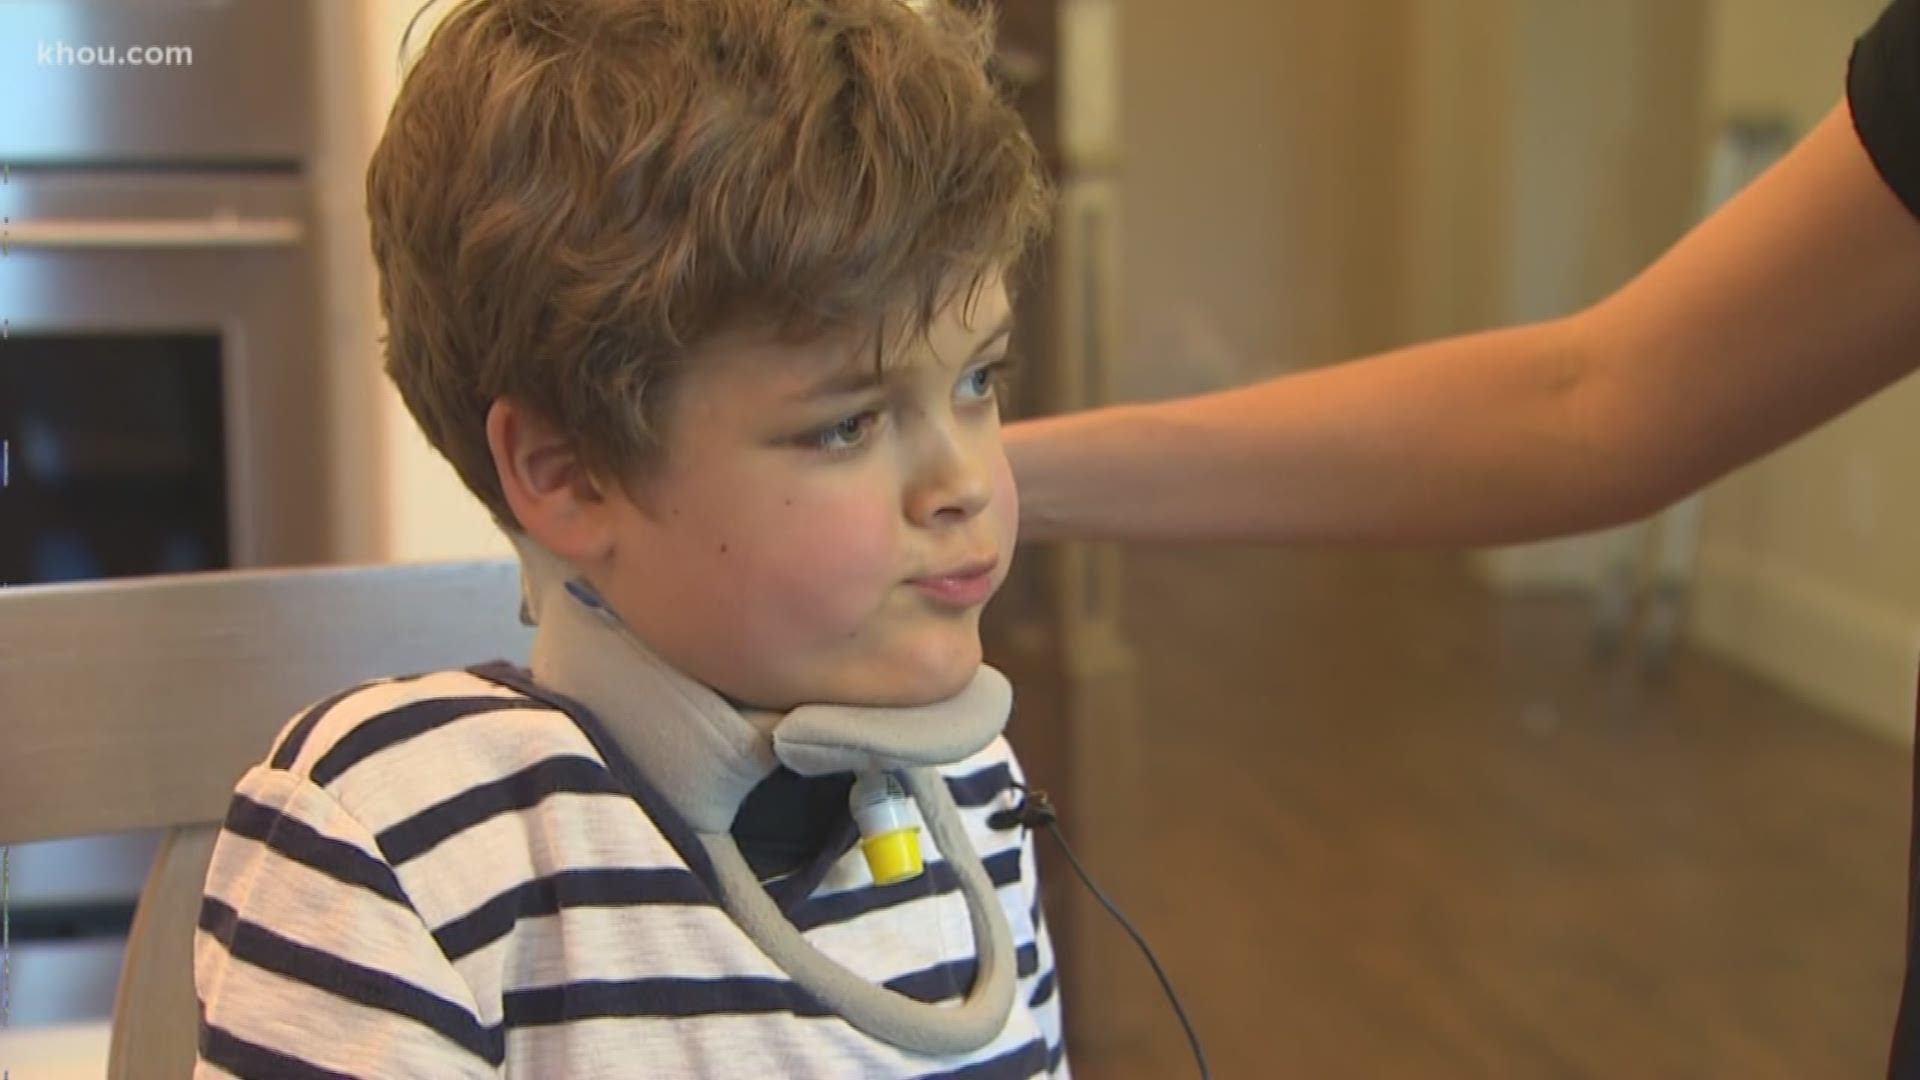 At least two children in the Greater Houston Area have contracted Acute Flaccid Myelitis (AFM), a rare illness that mimics polio and can cause paralysis in children. 